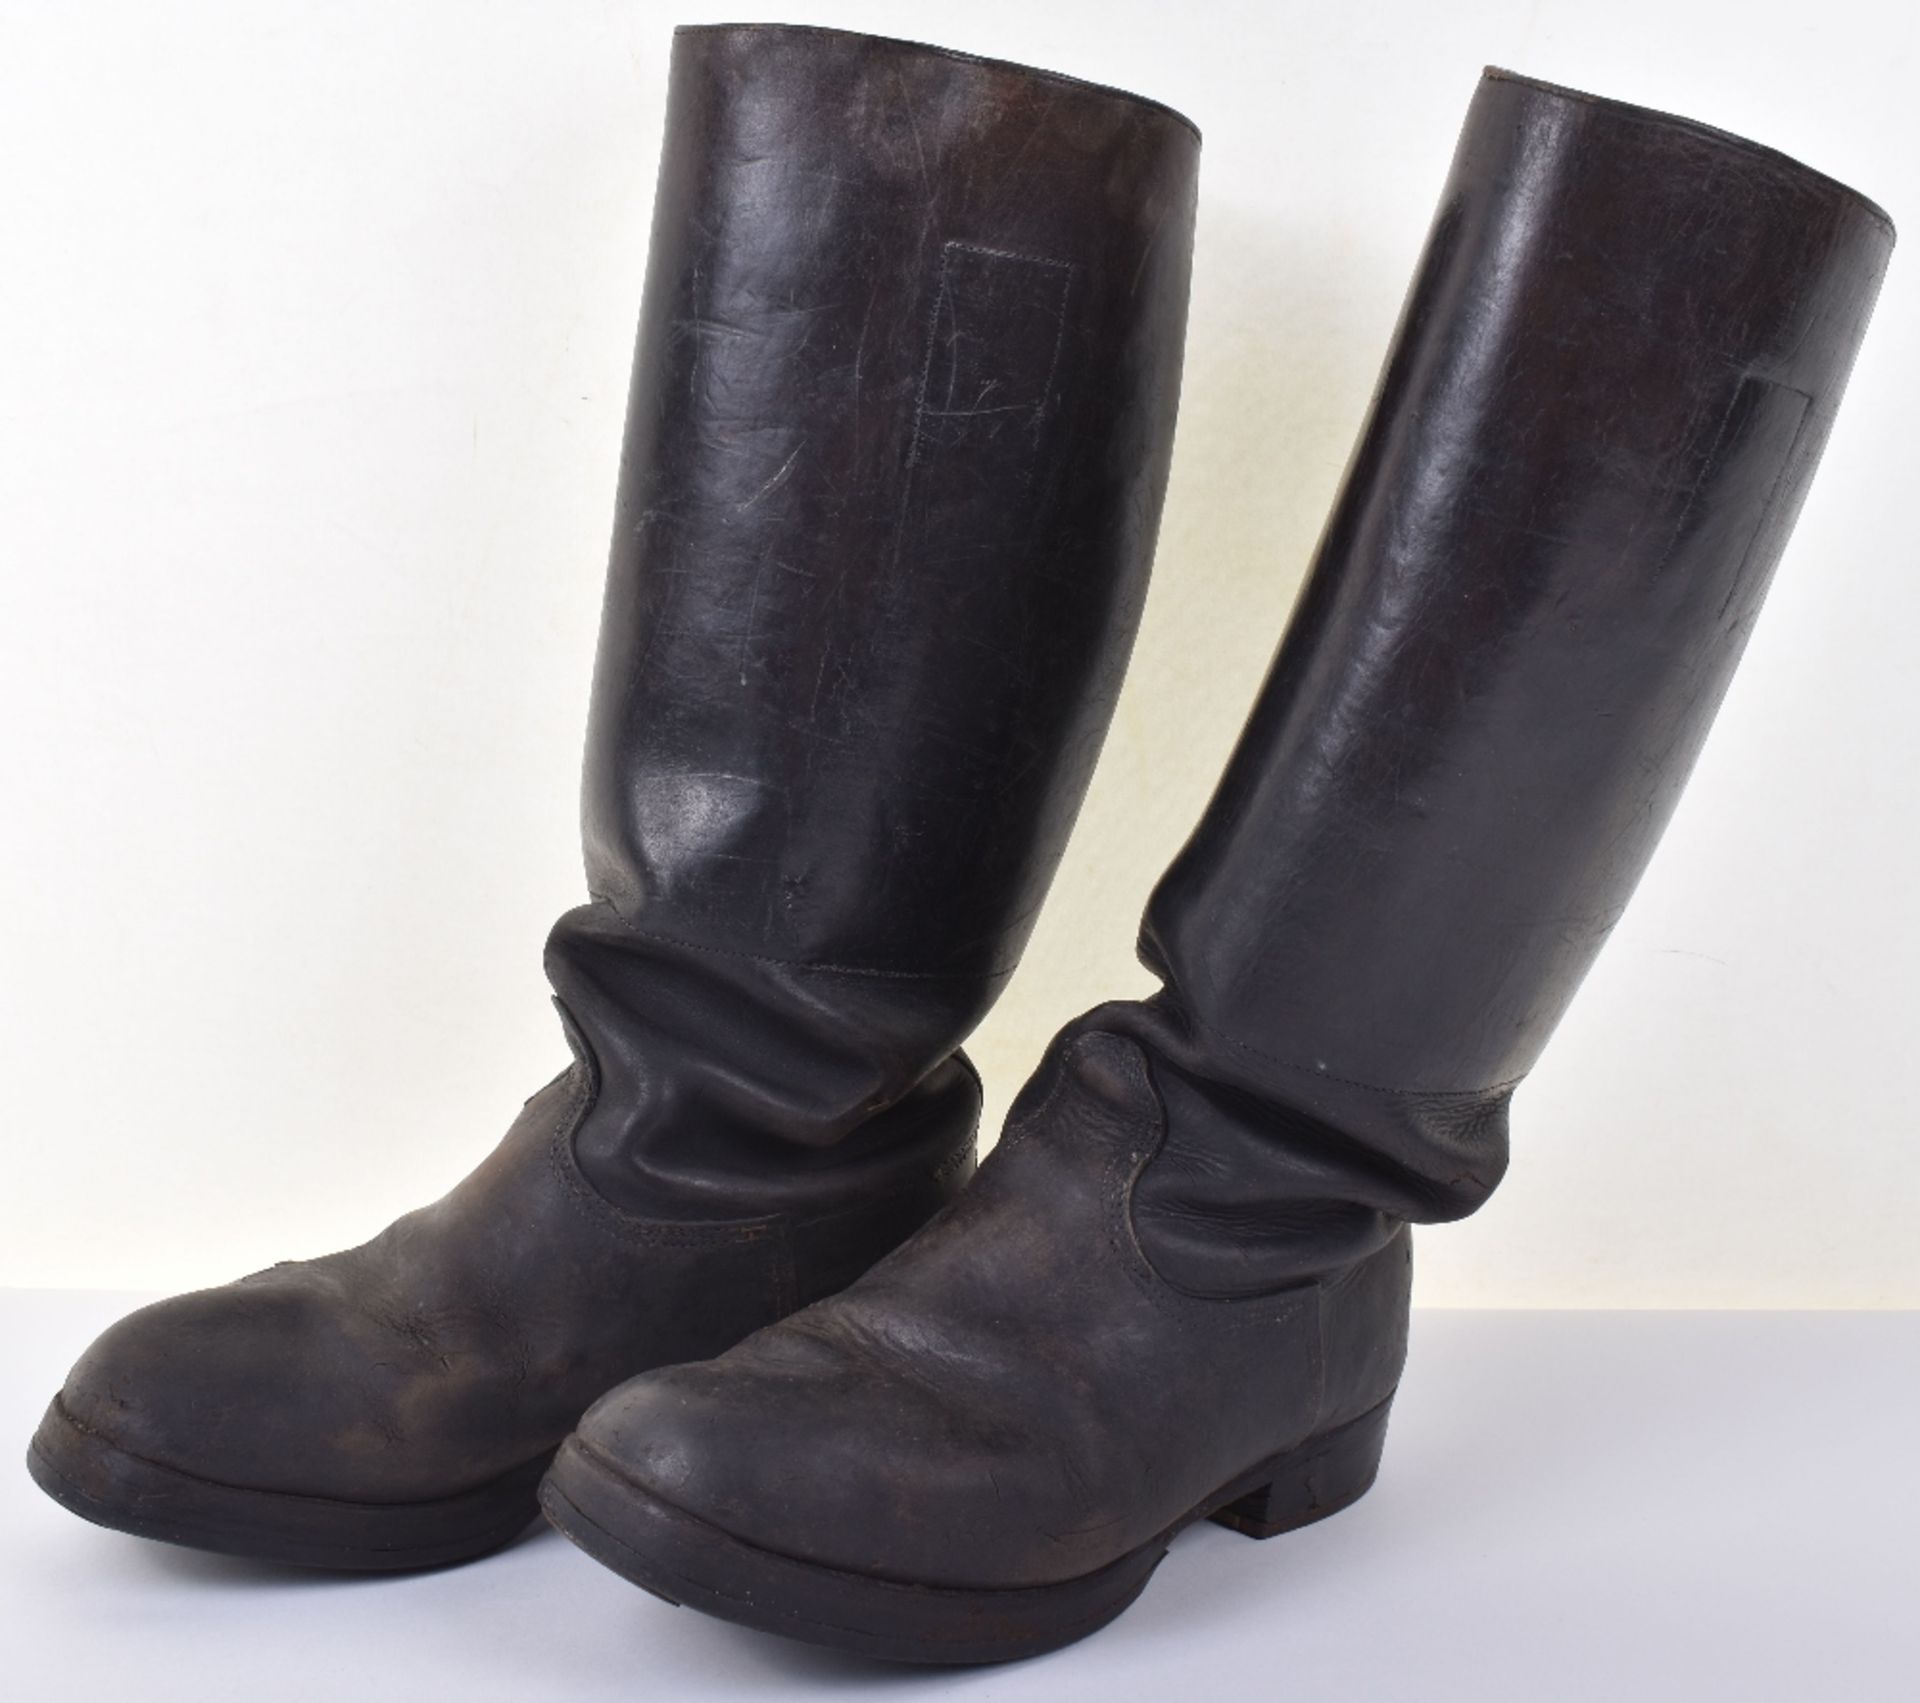 WW2 German Army Officers Jack Boots - Image 2 of 4